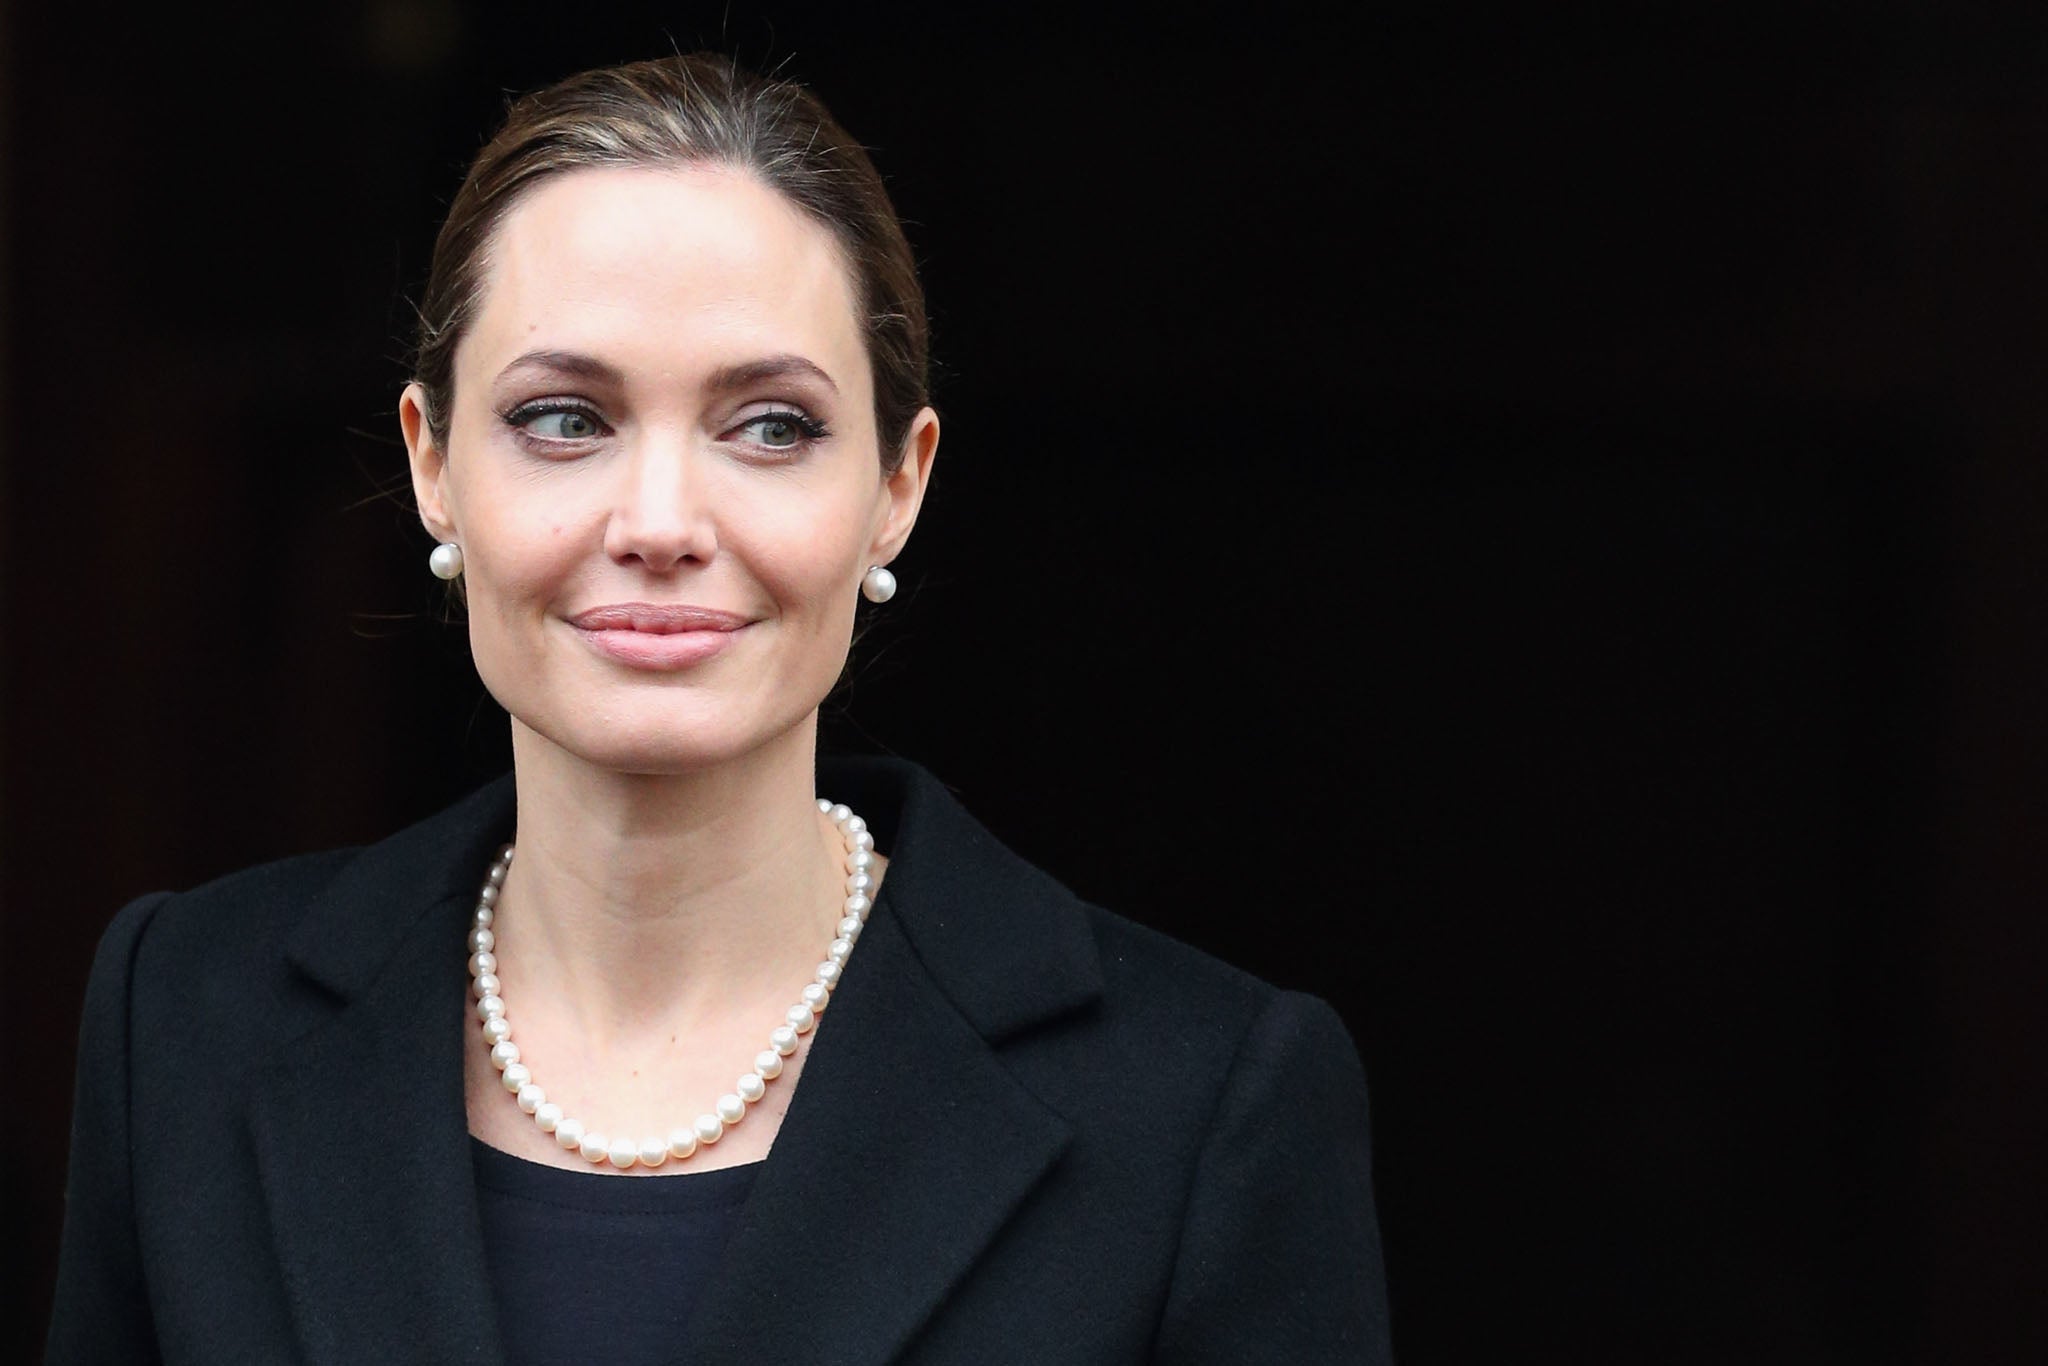 Angelina Jolie underwent a double mastectomy after finding she had an 87 per cent chance of developing breast cancer